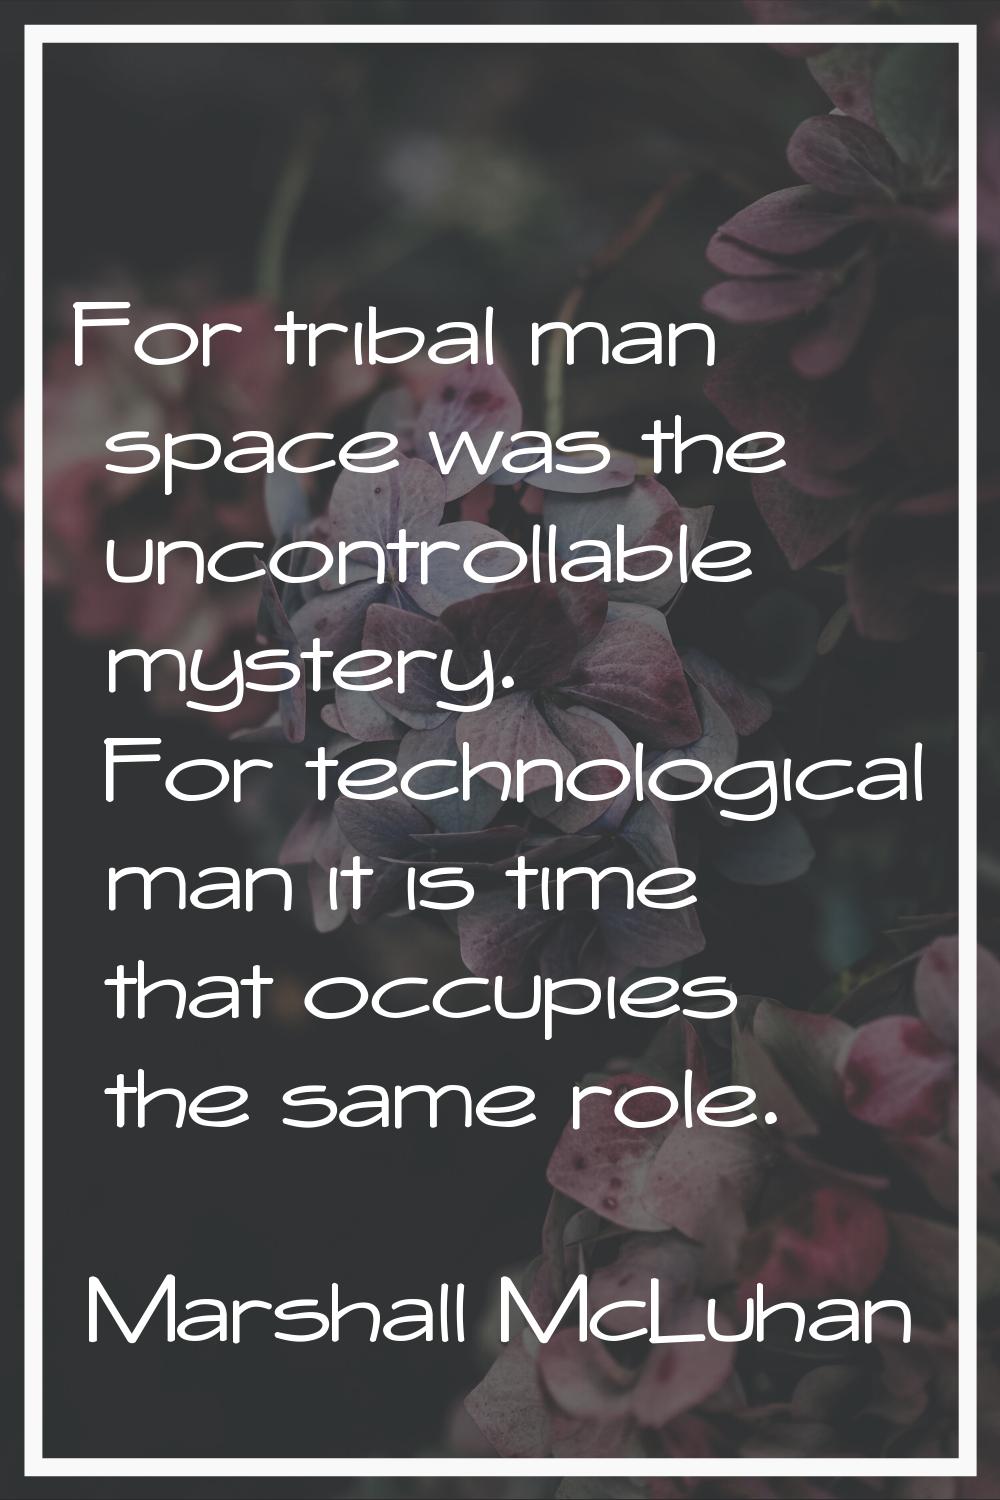 For tribal man space was the uncontrollable mystery. For technological man it is time that occupies